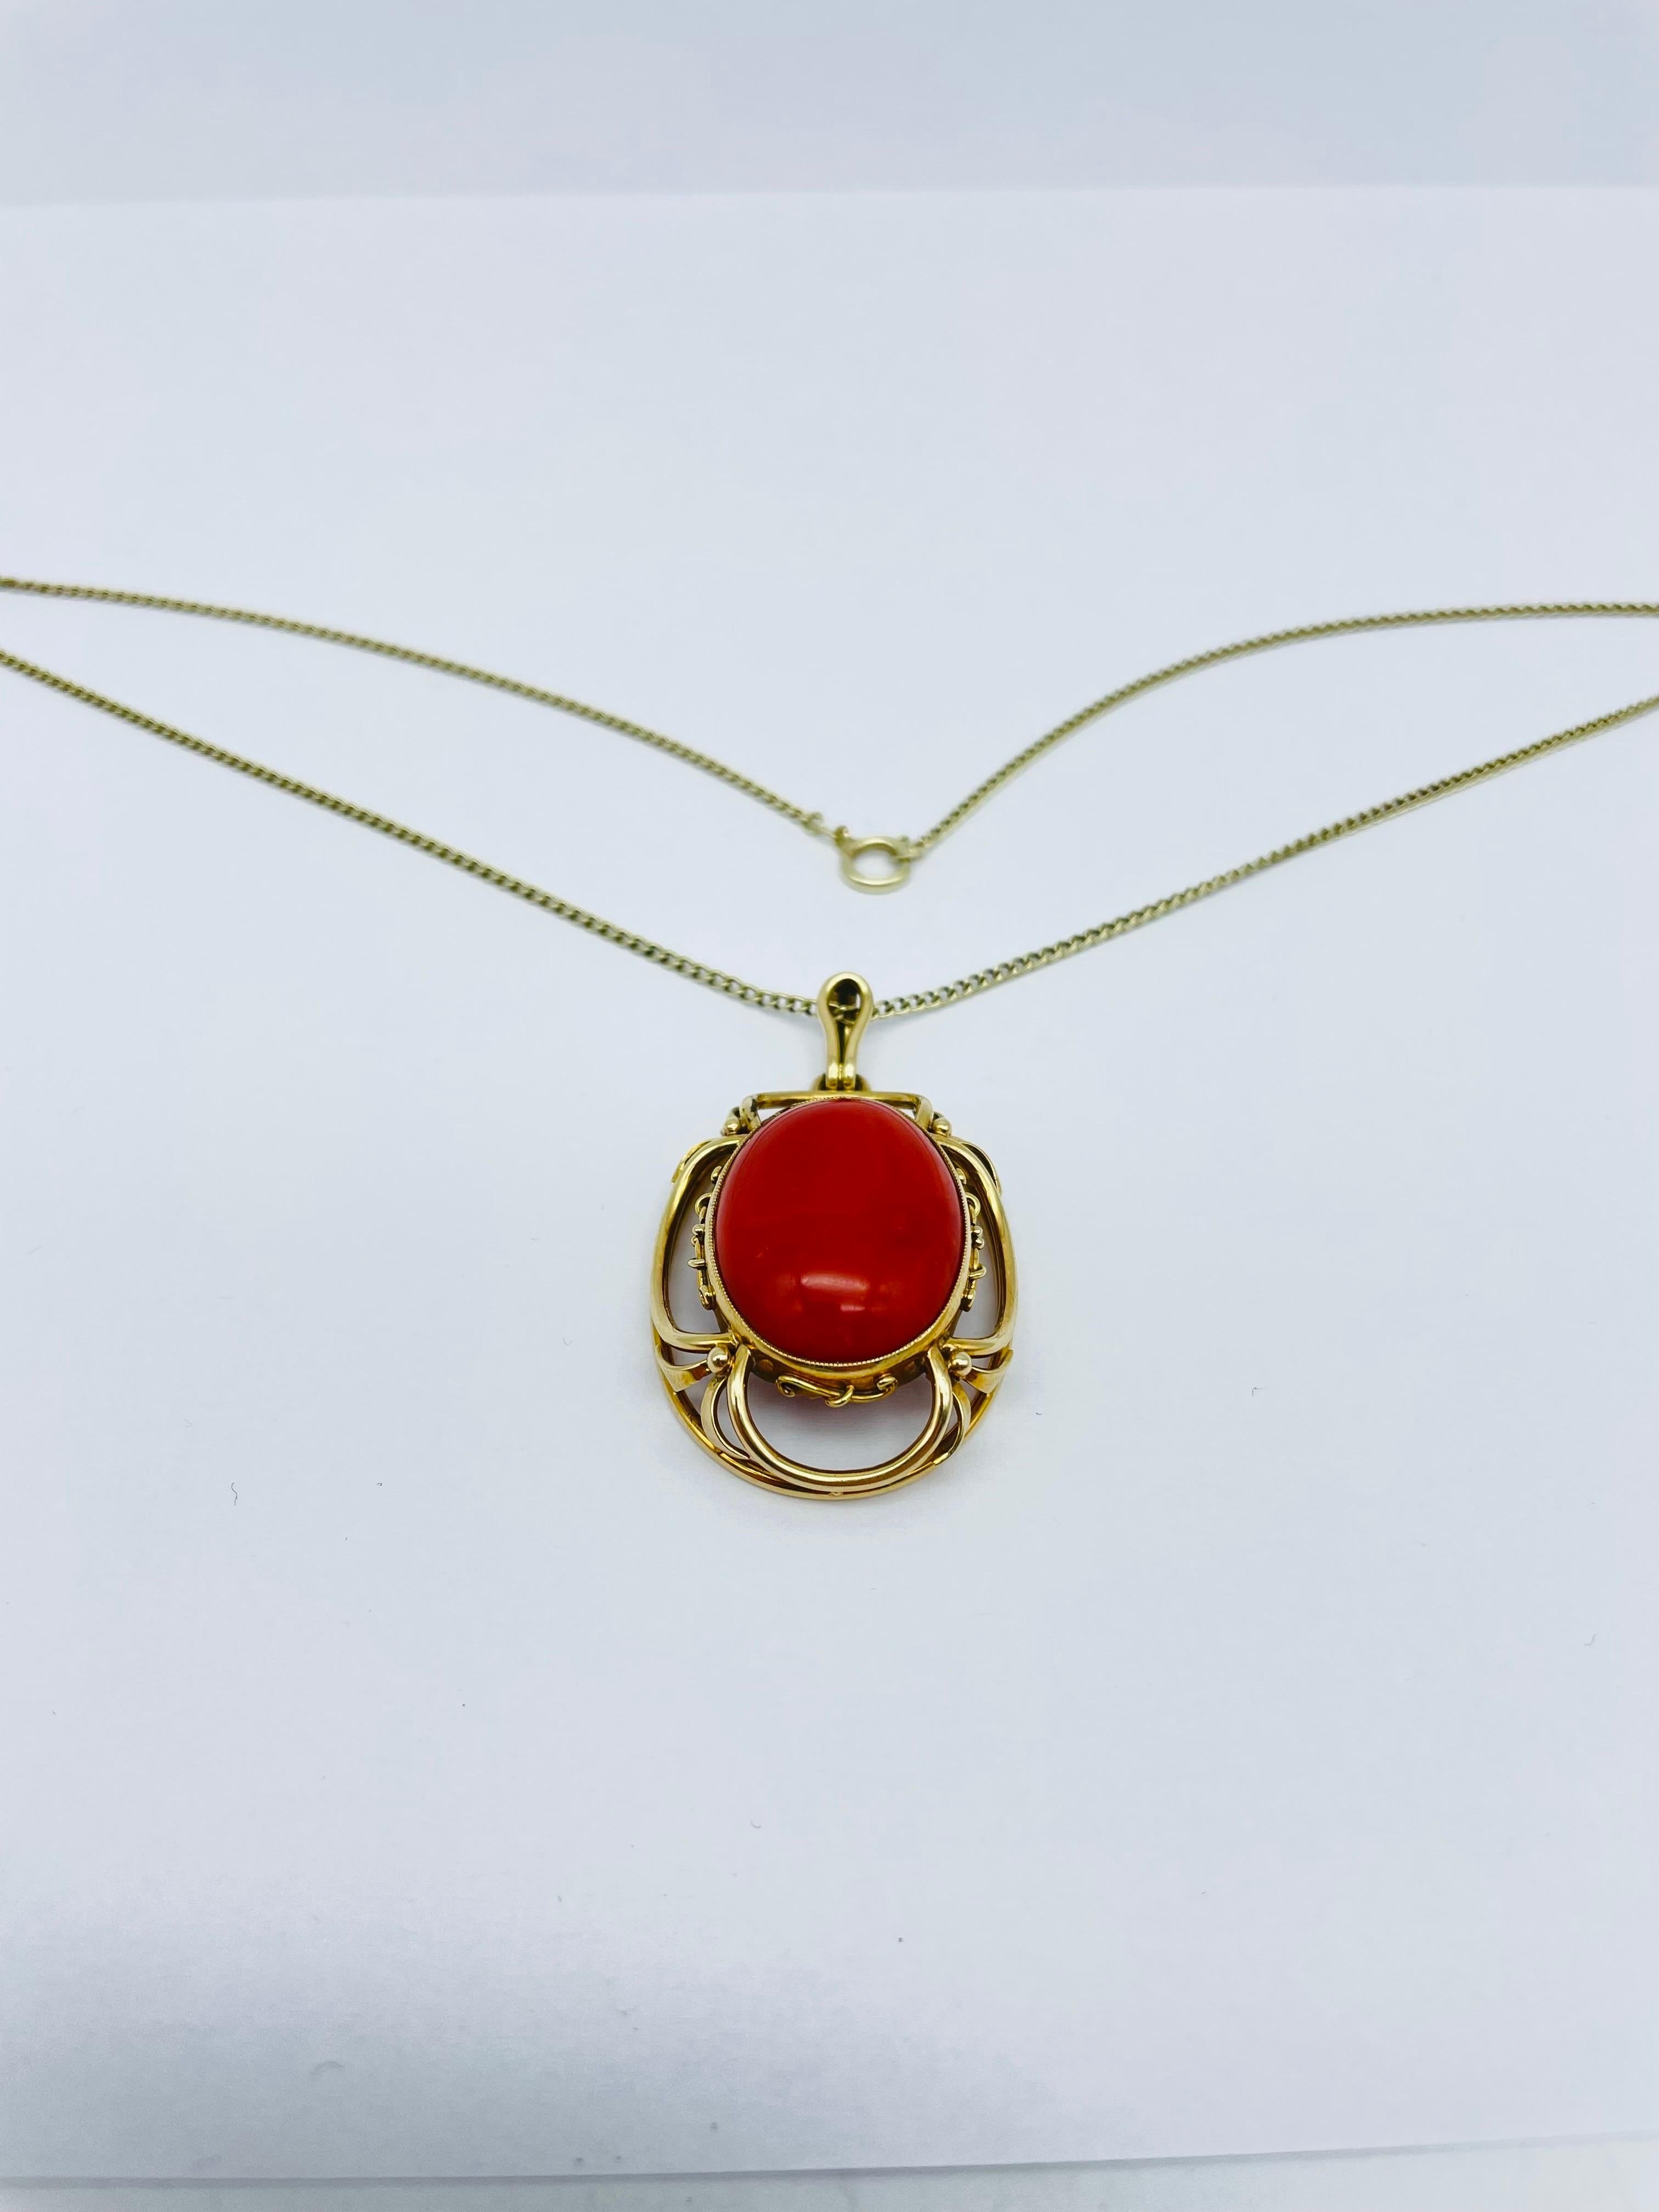 Noble 14K red coral pendant

14k yellow gold set with a large red coral cabochon. Finely designed gold mount with gold chain, also made of 14k yellow gold.

Dark red coral with grain